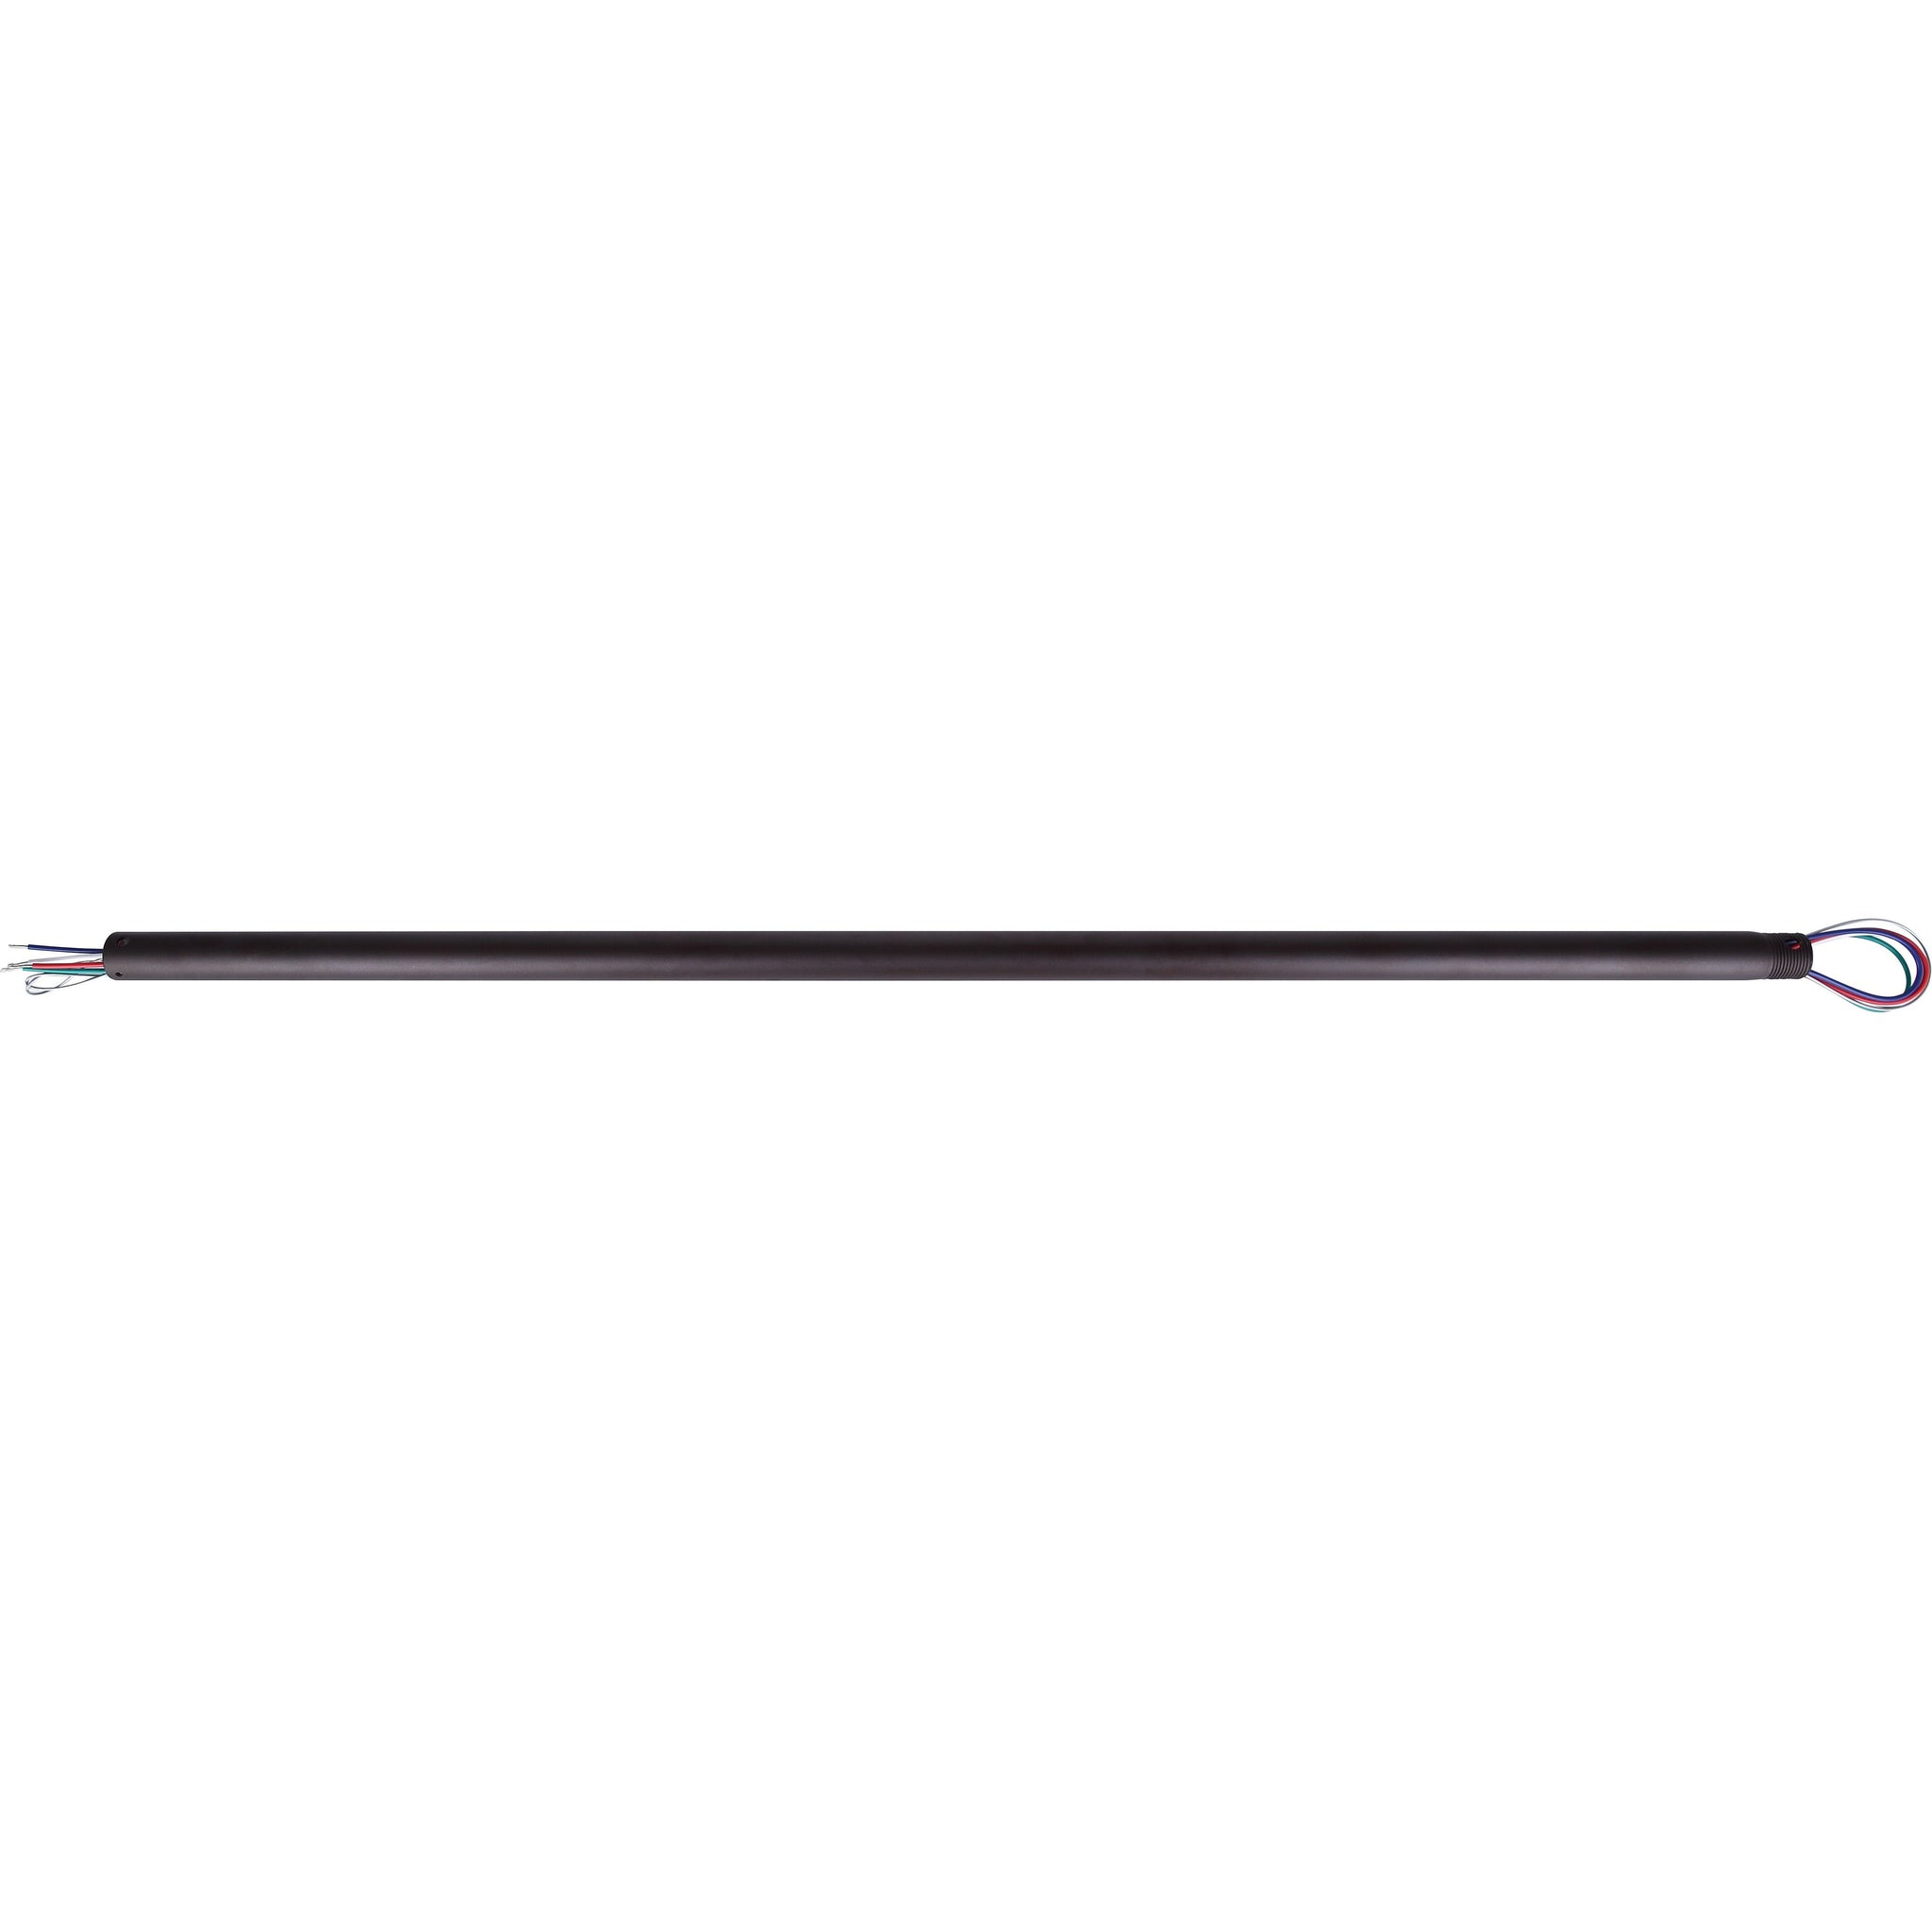 36" Replacement Downrod for AC Motor Fans